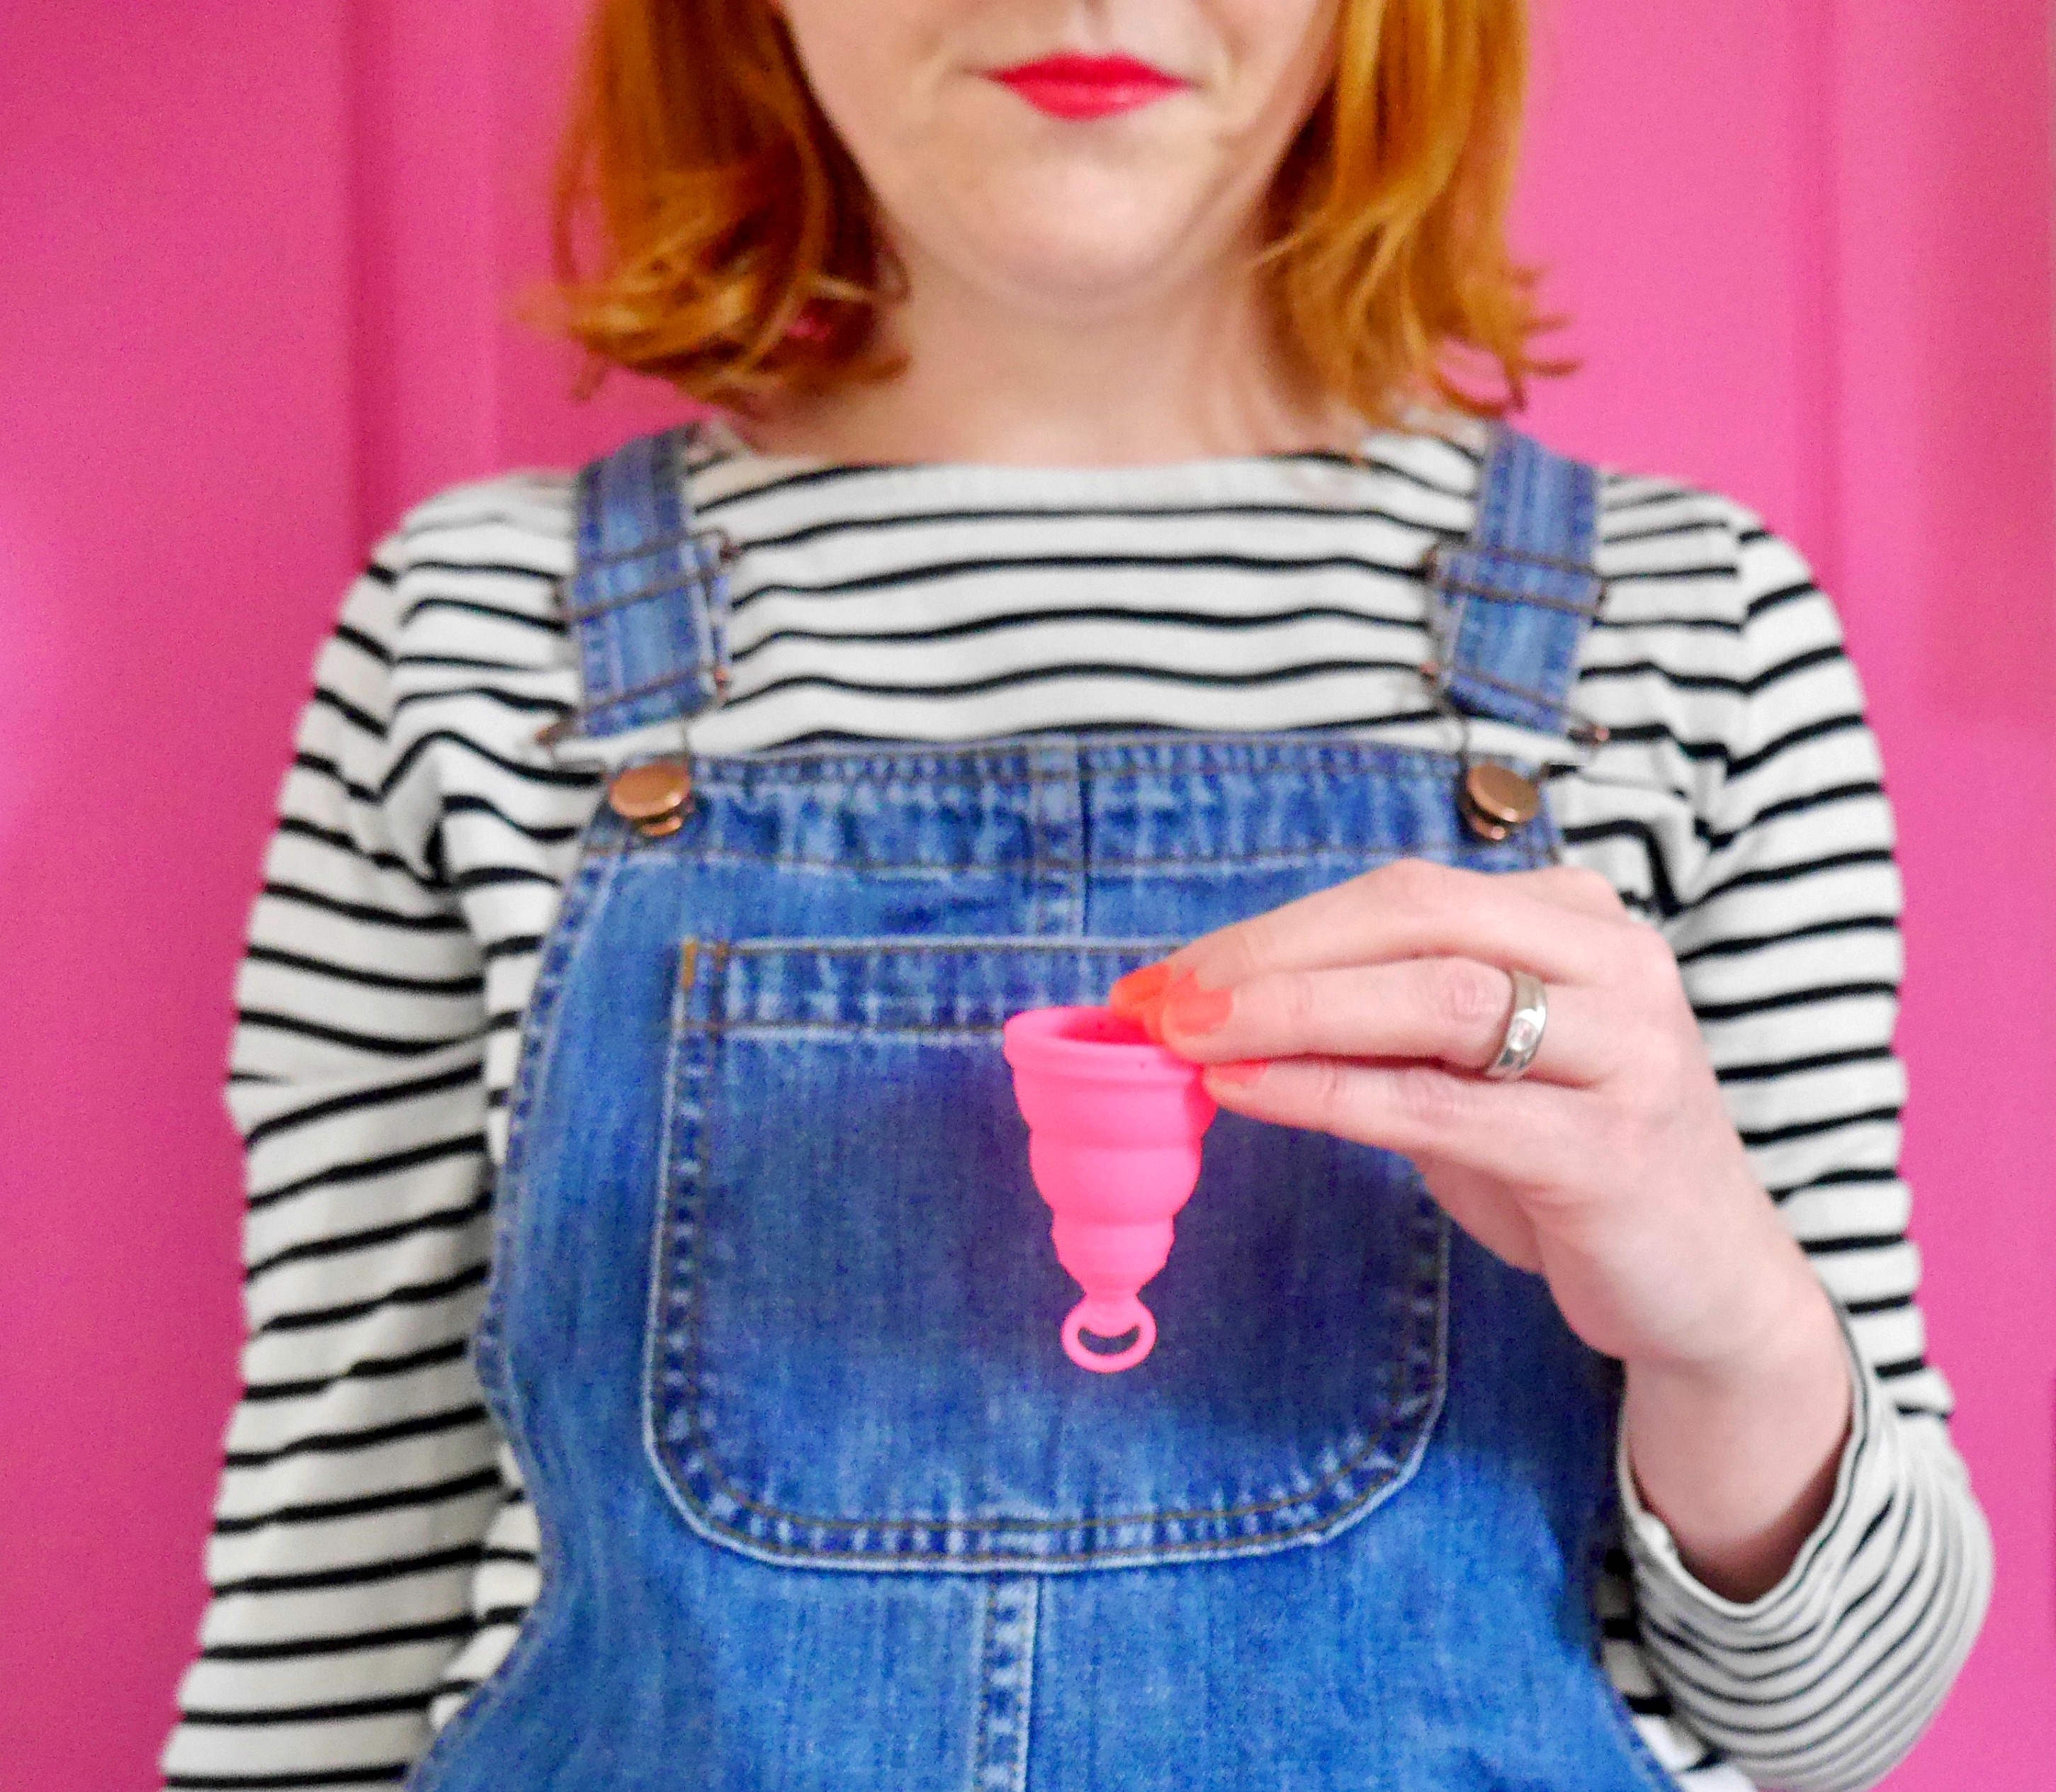 Lily Cup One Review: I Try Out The Lily Cup Menstrual Cup